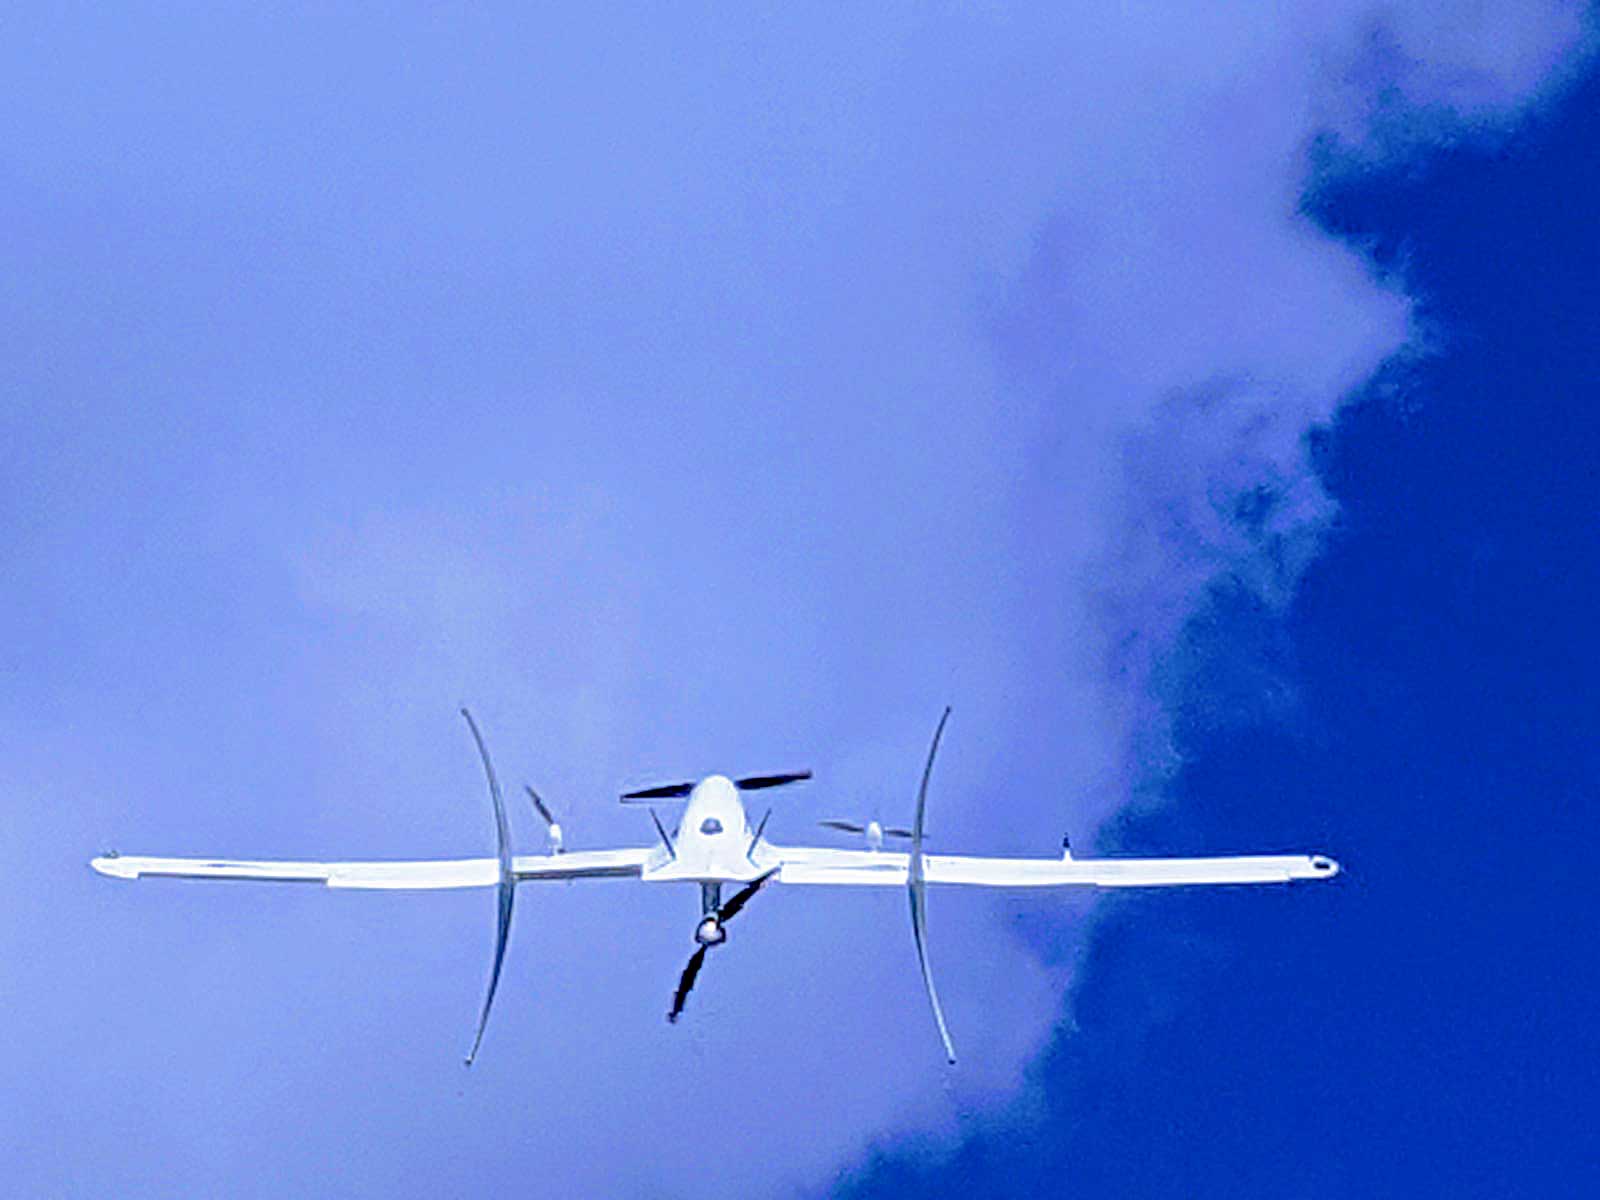 The joint American and Japanese teams flew unmanned Swift air vehicle systems integrated with live-streaming videos, georeferenced orthomosaic, and NDVI image capturing capabilities.